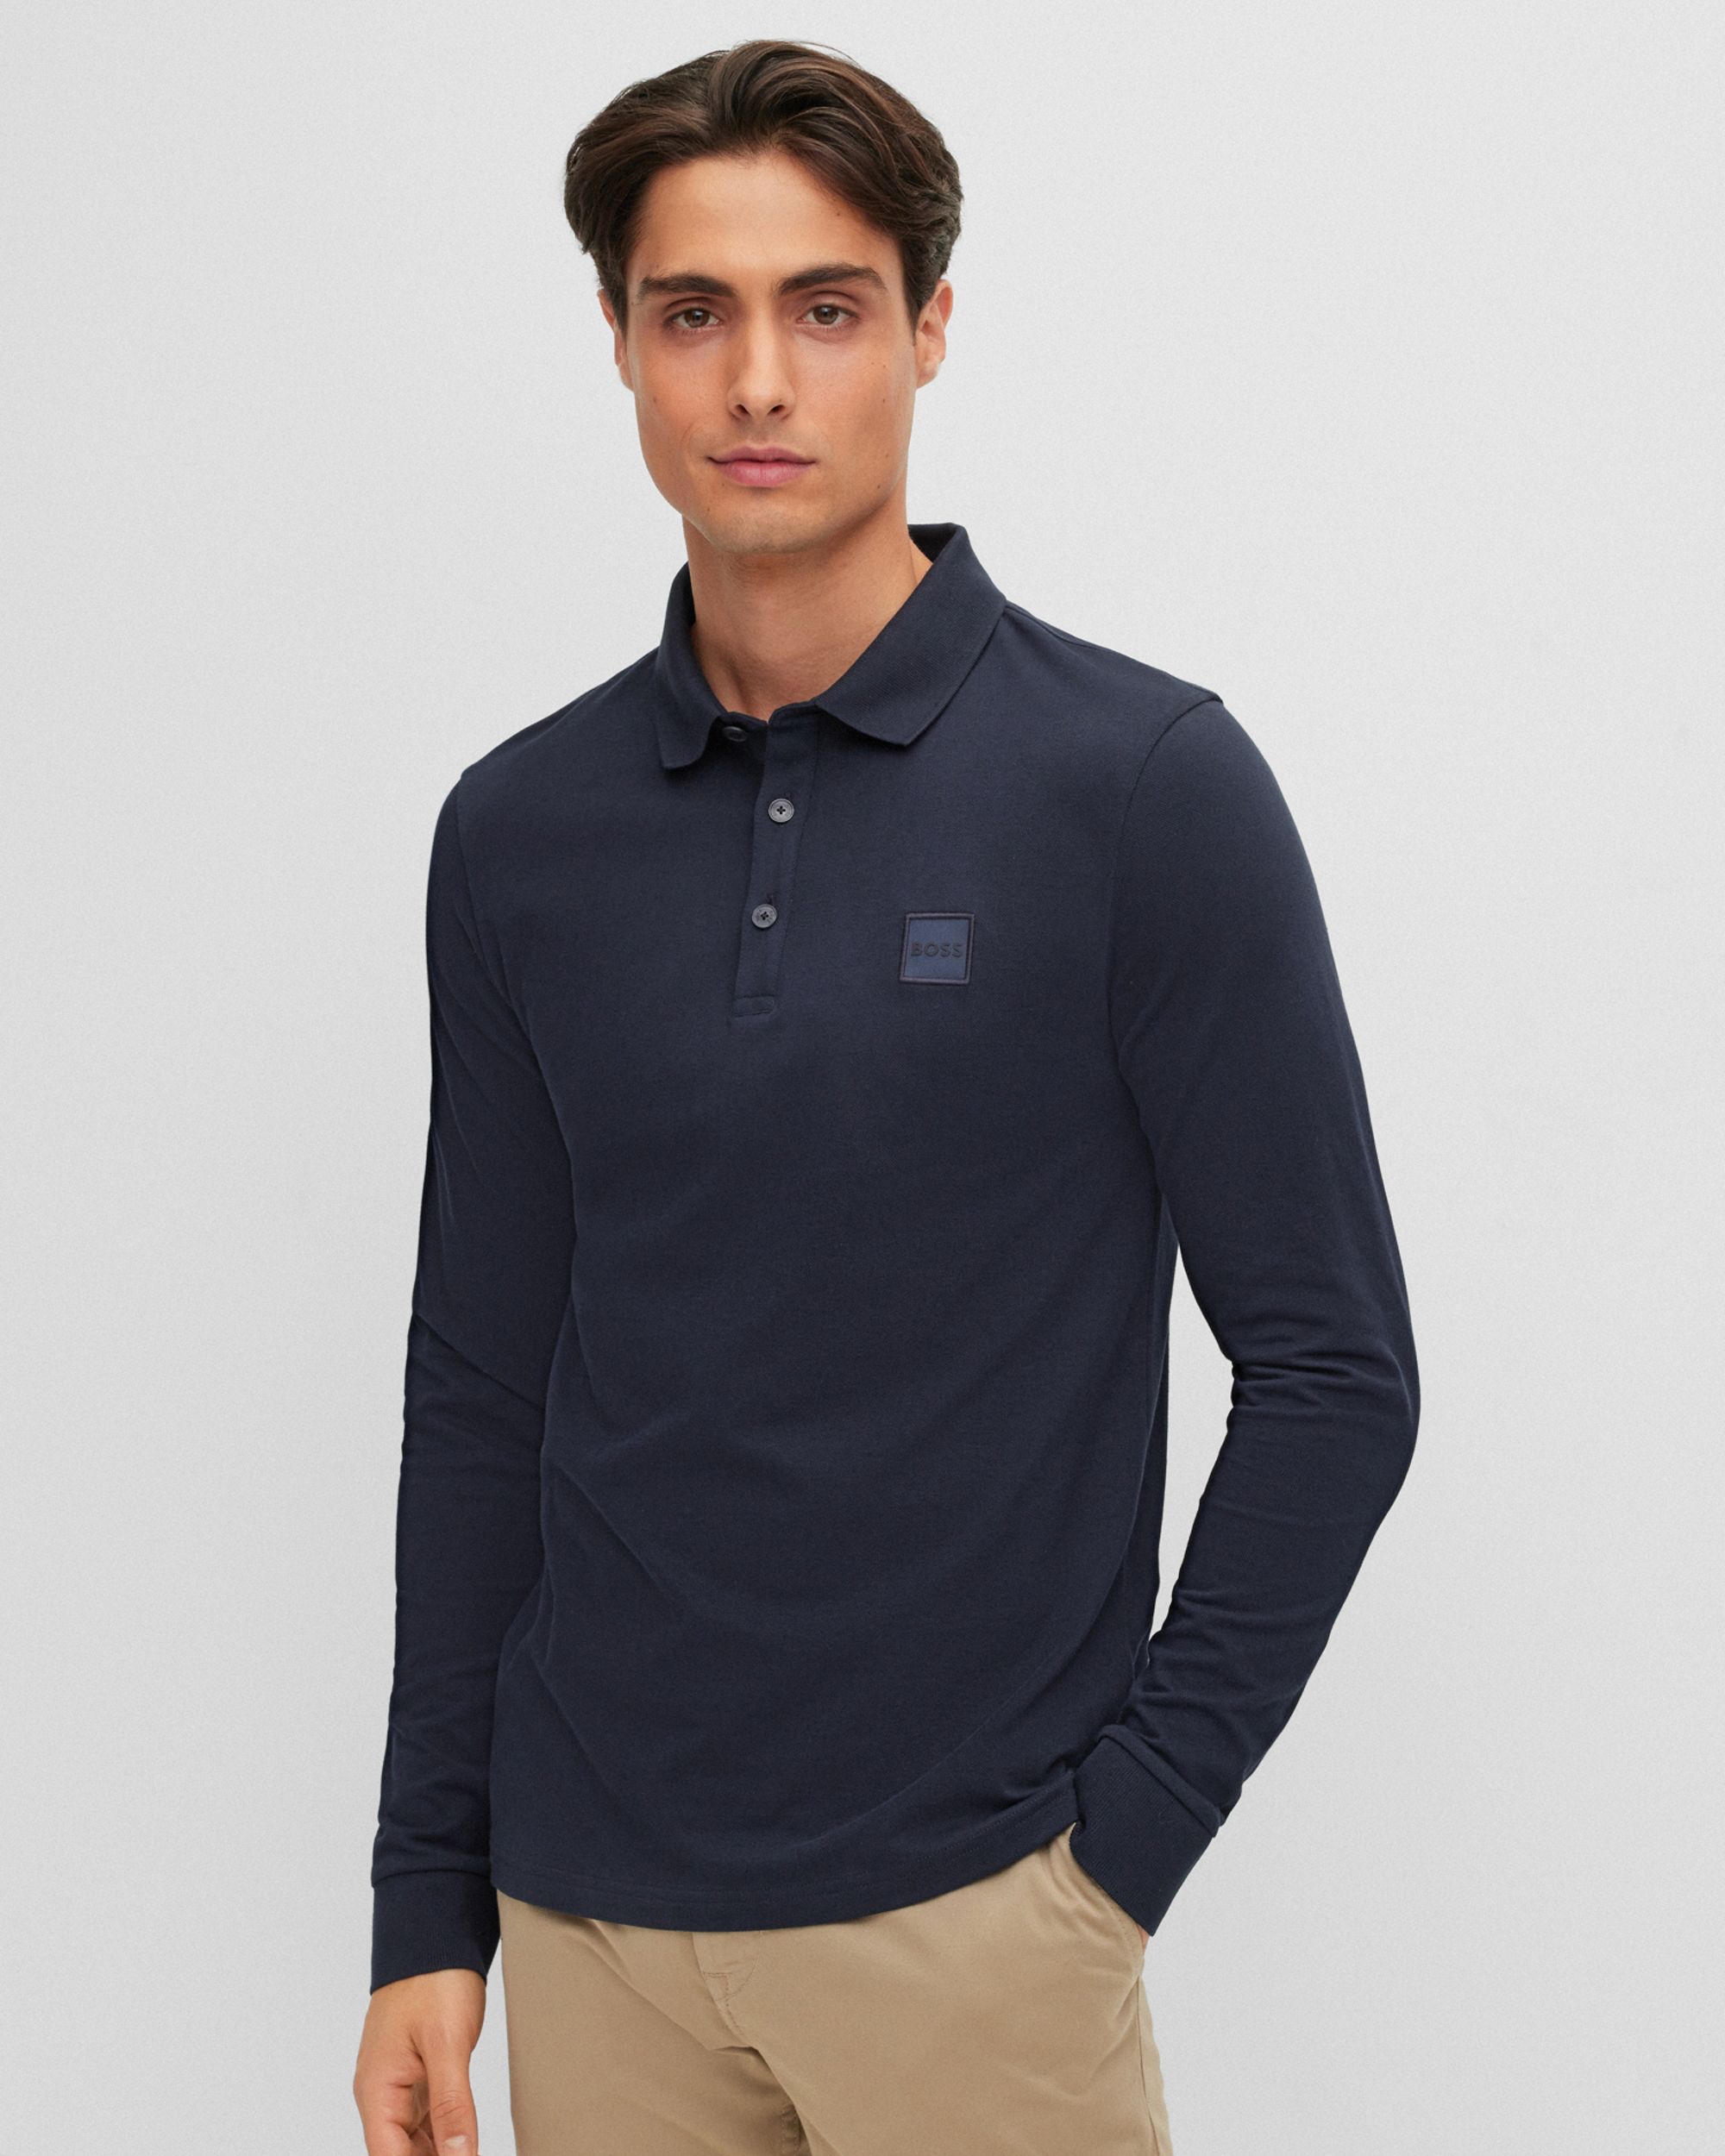 Boss Passerby Polo LM Donker blauw 074035-001-L